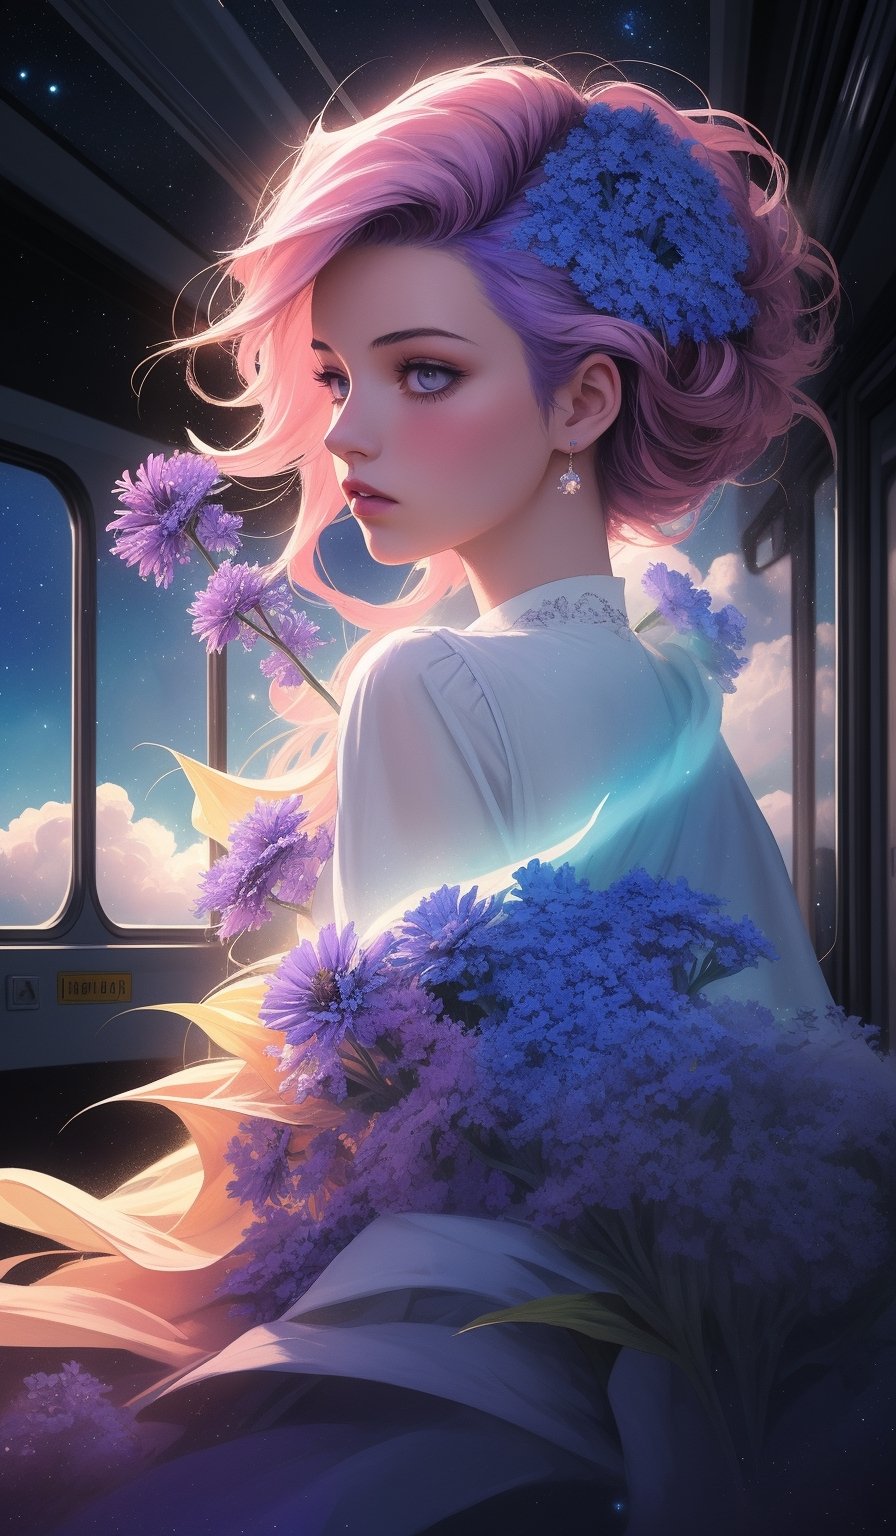 Teen girl with cornflowerblue long faux hawk hair, Hyperrealistic train carriage detailed with blooming flowers,ethereal cloud animals with shimmering outlines,passengers gazing in awe,vast sky with swirling galaxies,cosmic colors (purples, blues, pinks),dramatic lighting,mystical atmosphere
,Expressiveh,concept art,dark theme,Mysticstyle,midjourney